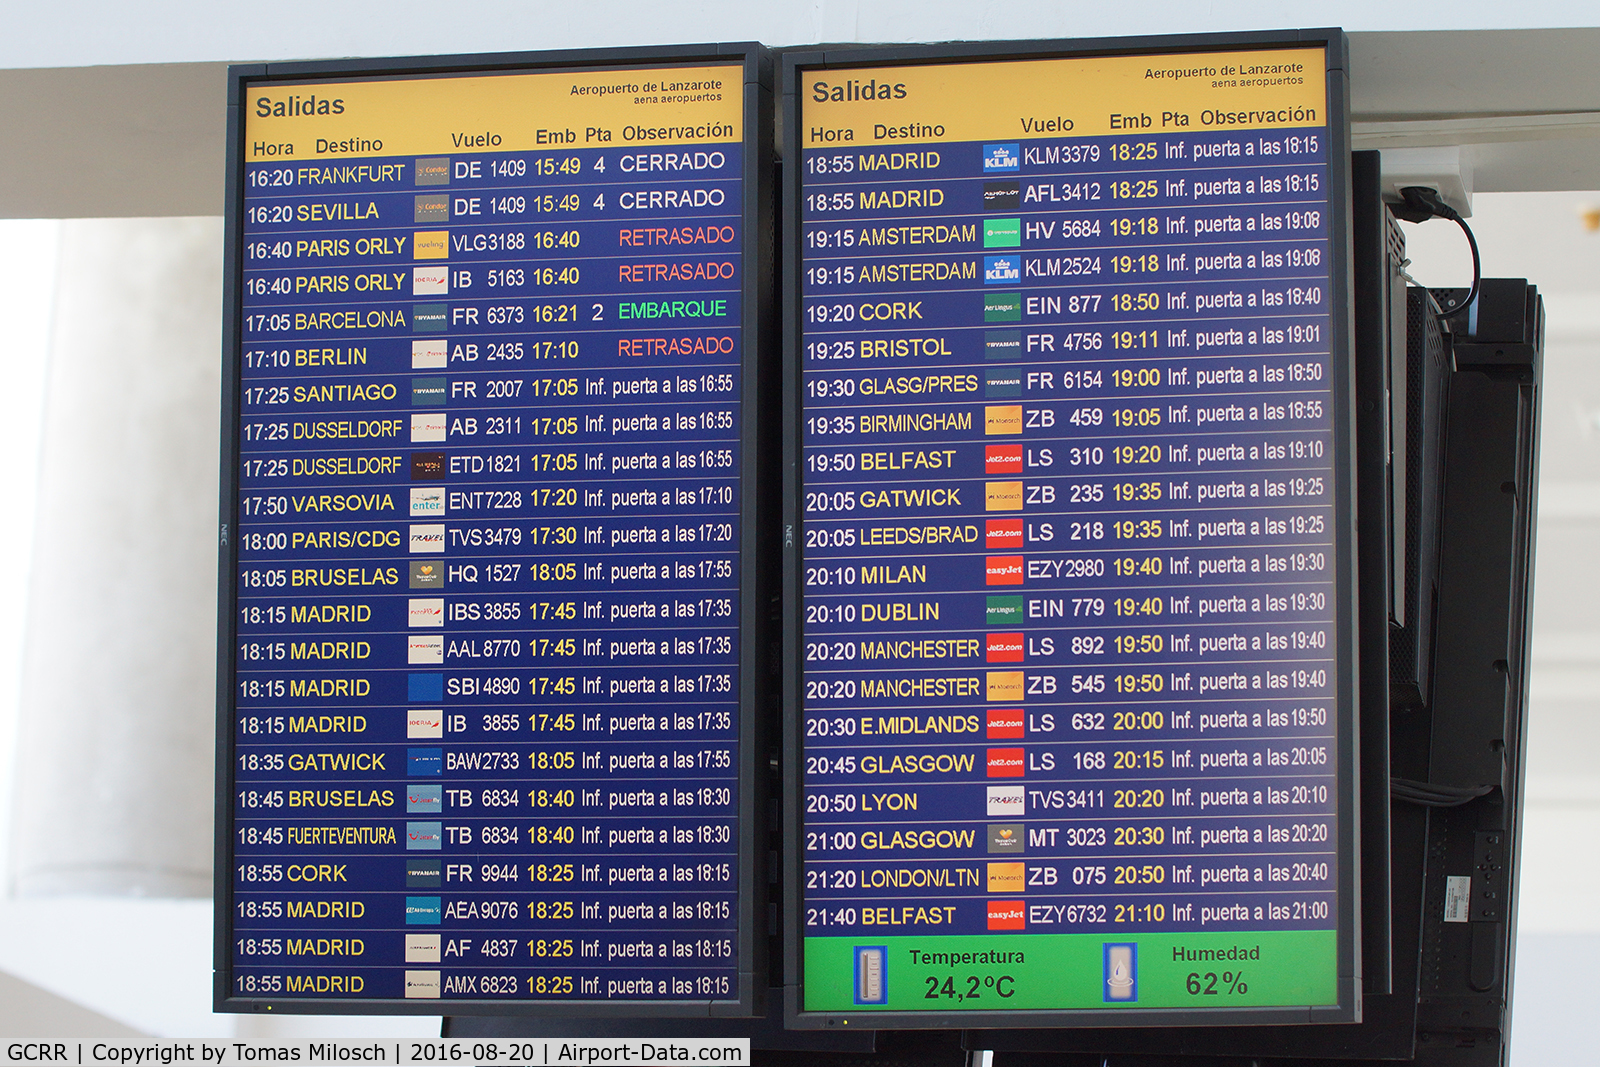 Arrecife Airport (Lanzarote Airport), Arrecife Spain (GCRR) - UK bound flights are dominating in the evenings ...